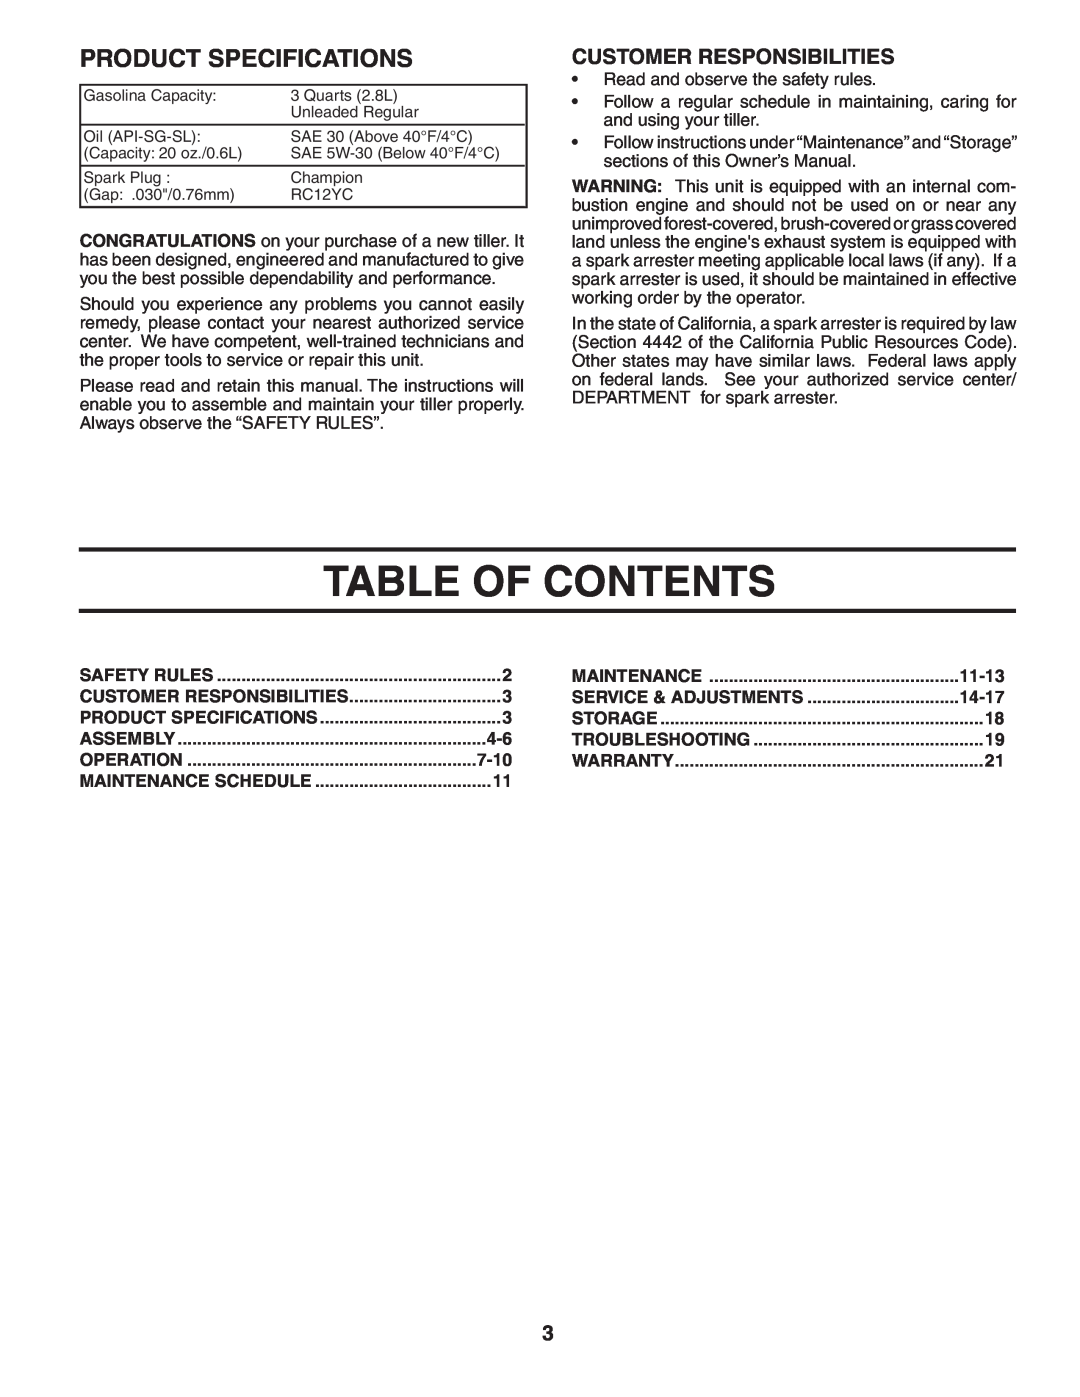 Poulan 401434 manual Table Of Contents, Product Specifications, Customer Responsibilities 